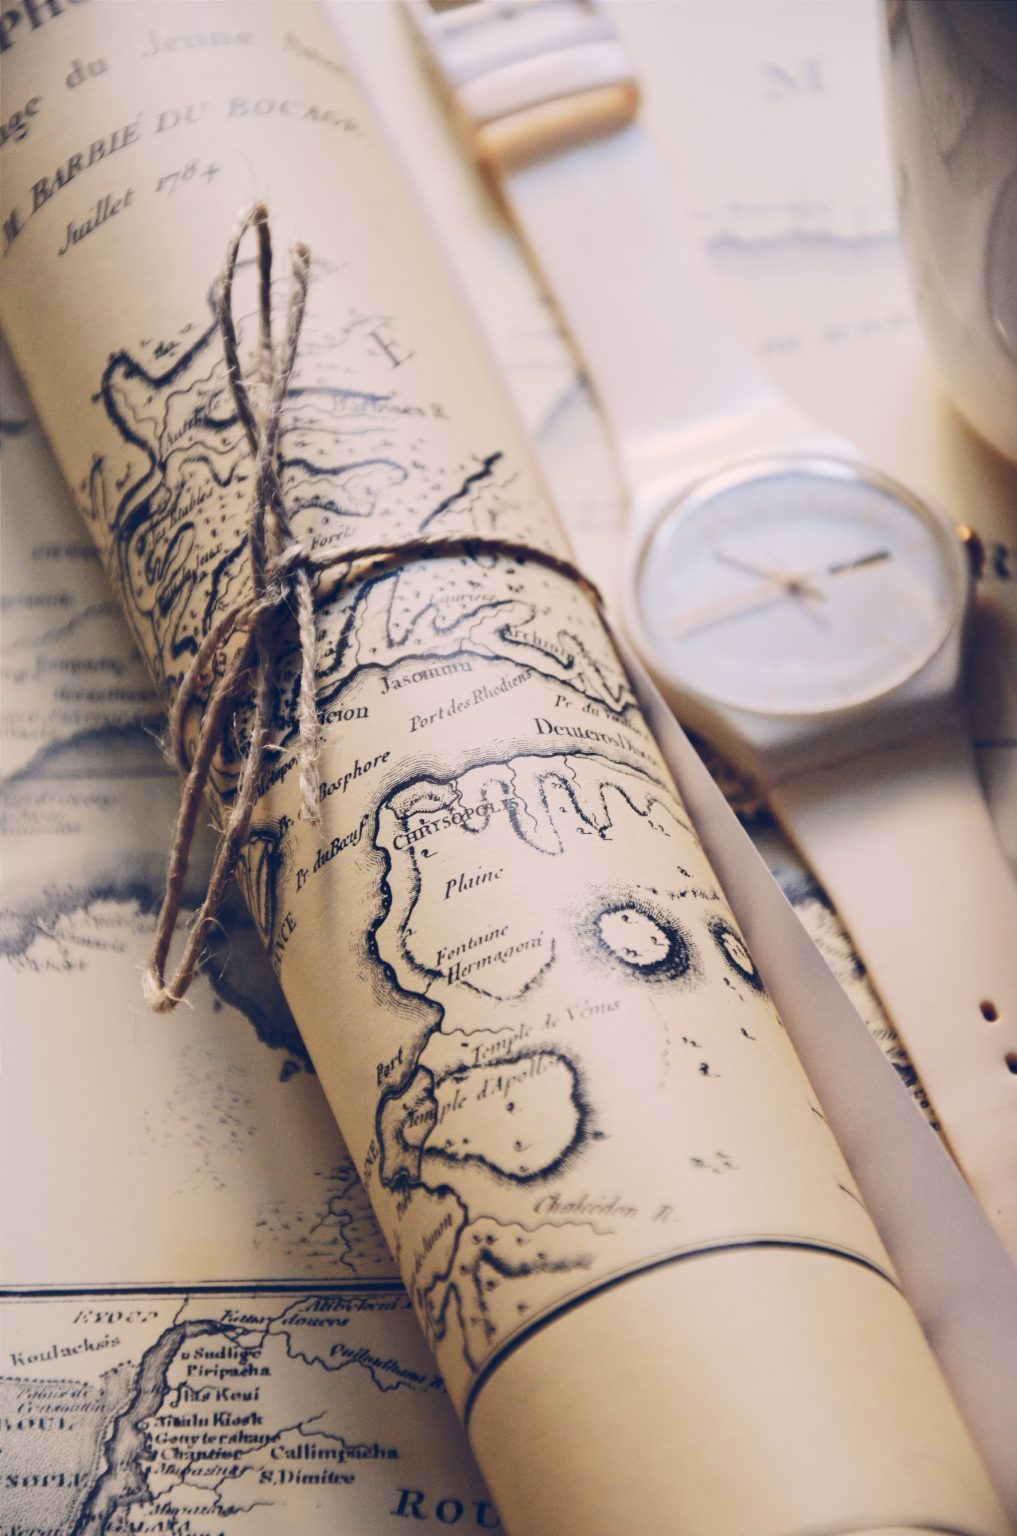 Image of an ancient map rolled up and tied with twine.